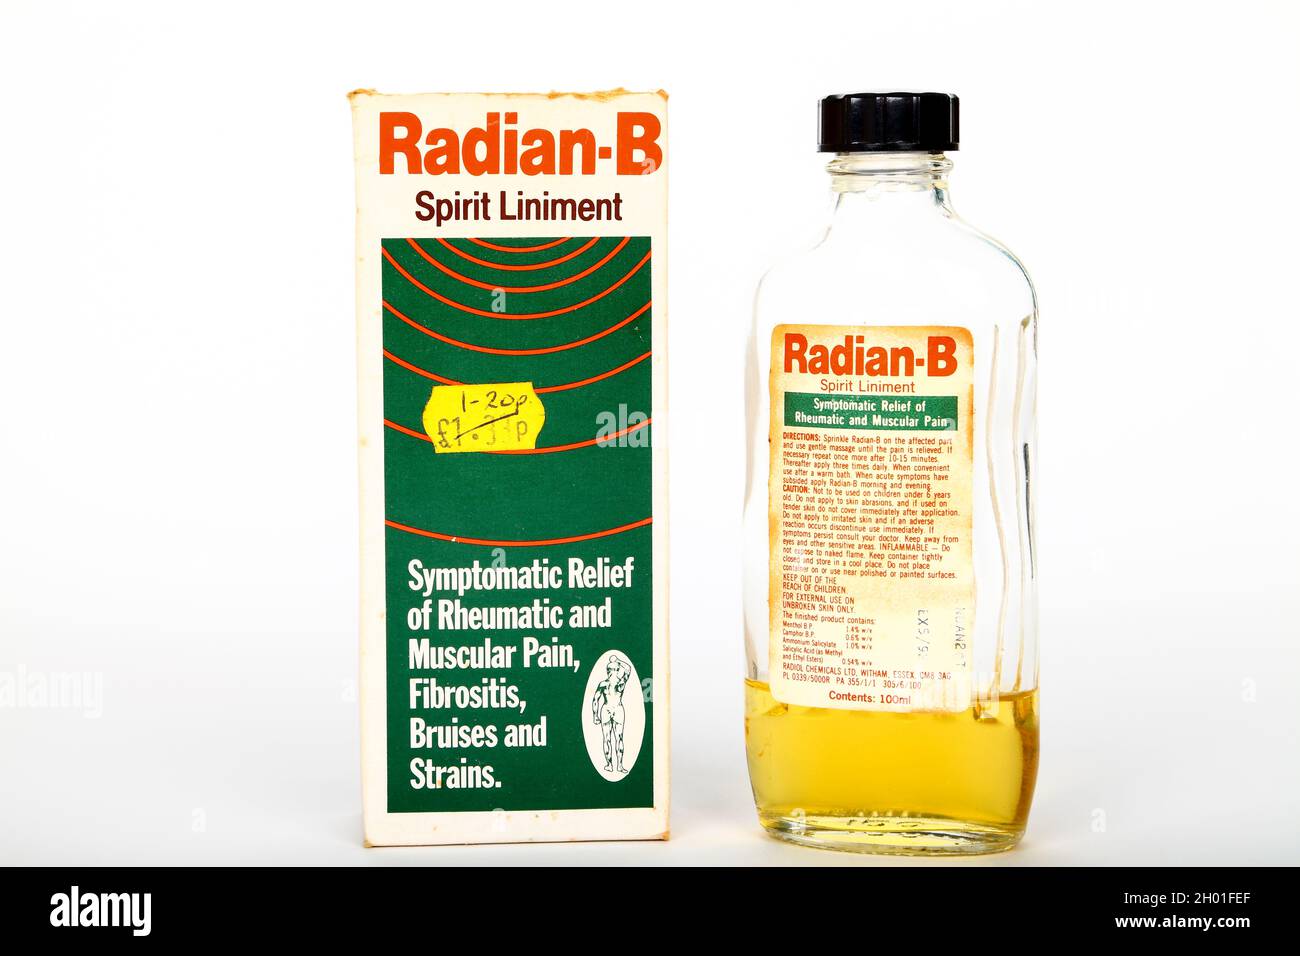 Vintage bottle of Radian B Spirit Liniment for the symtomatic relief of rheumatic and muscular pain, fibrositis, bruises and strains Stock Photo